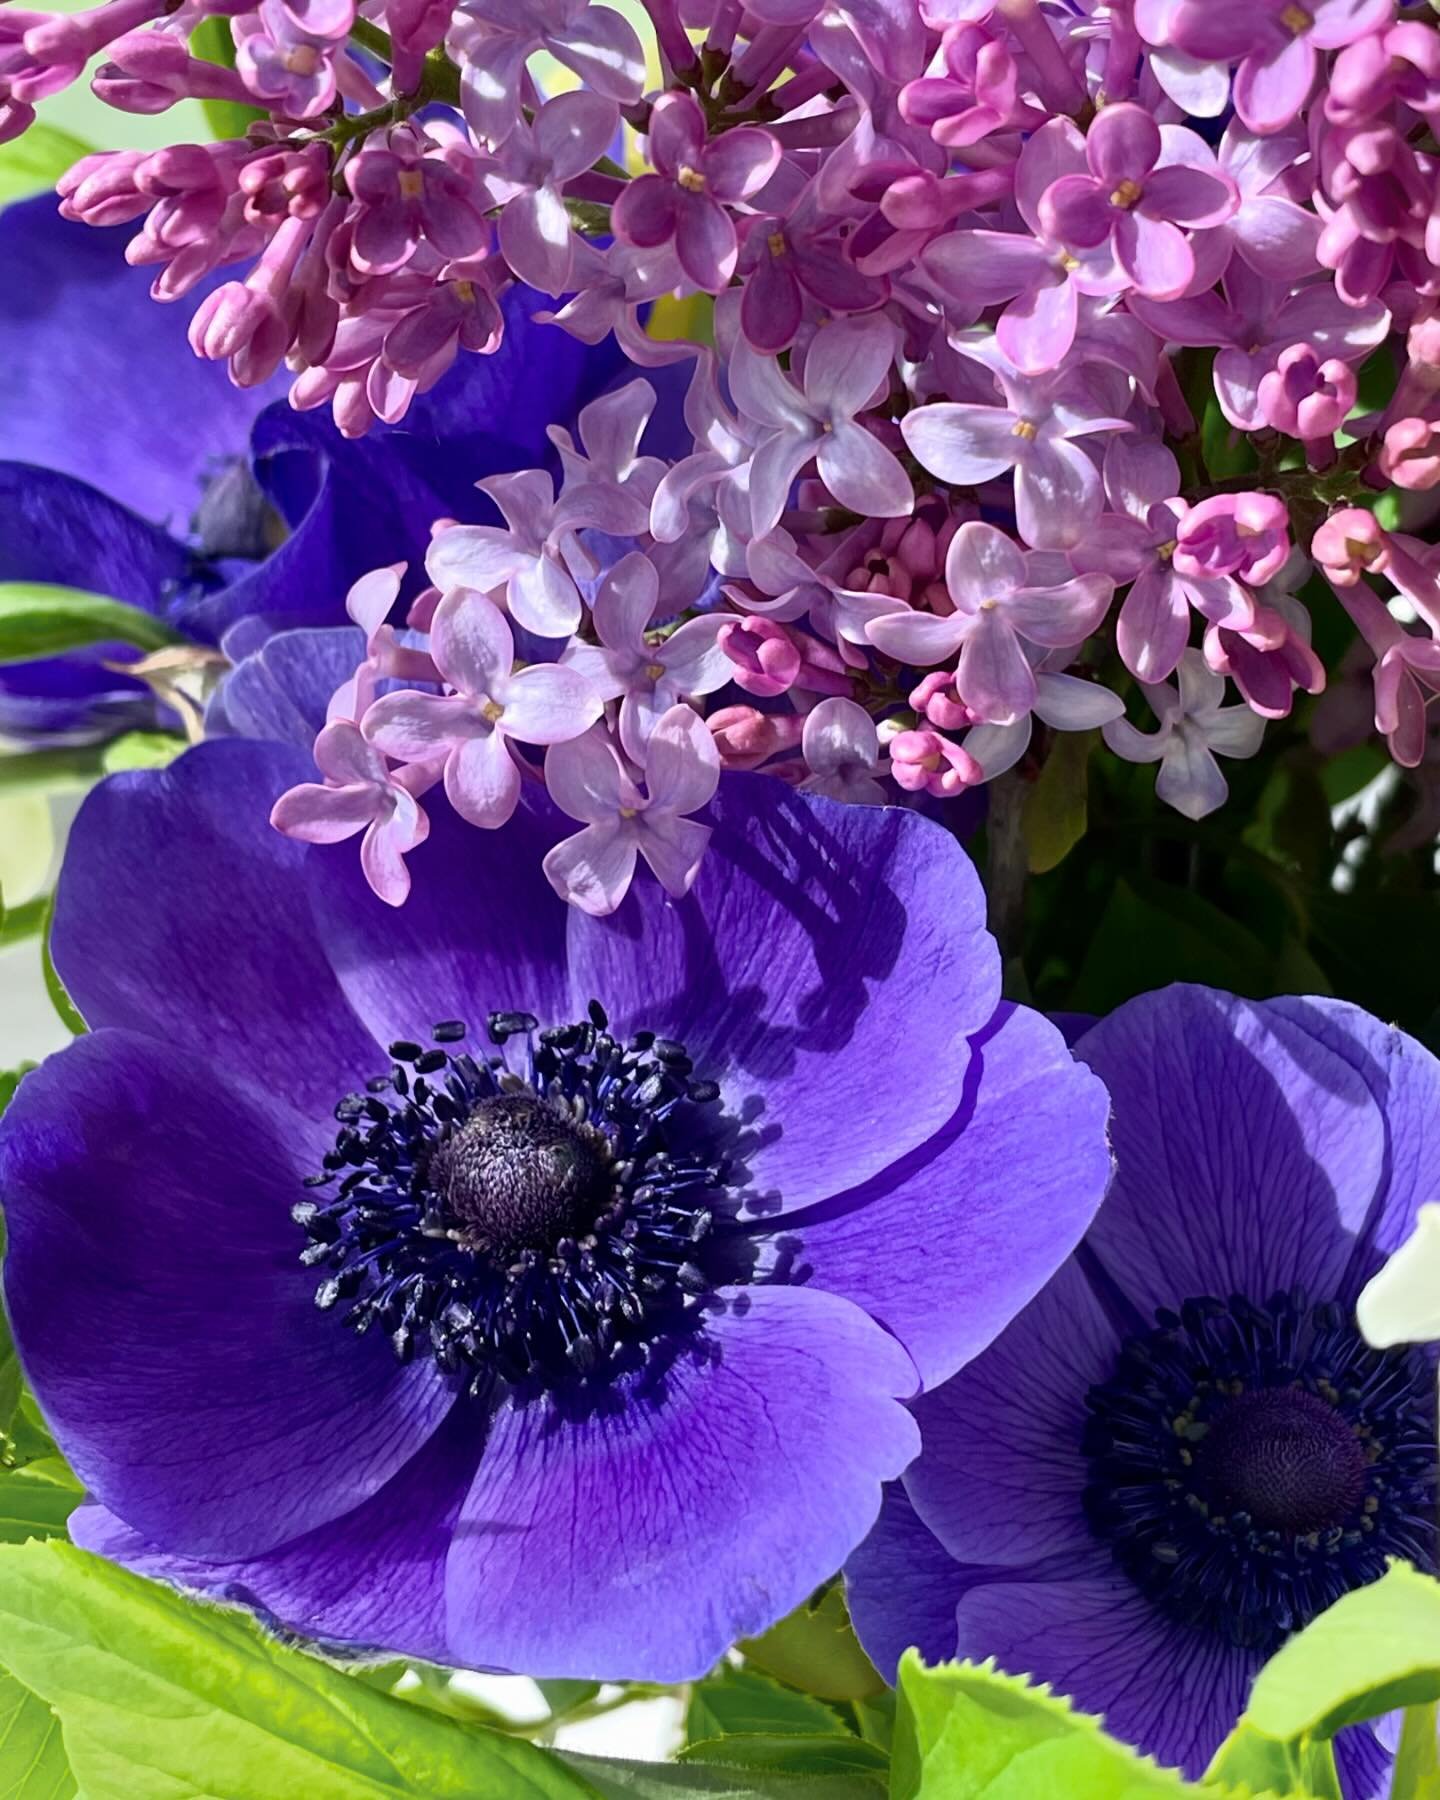 This week&rsquo;s harvest for the home: anemone, lilac, and fancy daffodils! The lilacs are from a plant grown by my MIL&rsquo;s mother in Virginia decades ago. I&rsquo;ve moved and propagated the bush multiple times and&mdash;finally&mdash;I&rsquo;m